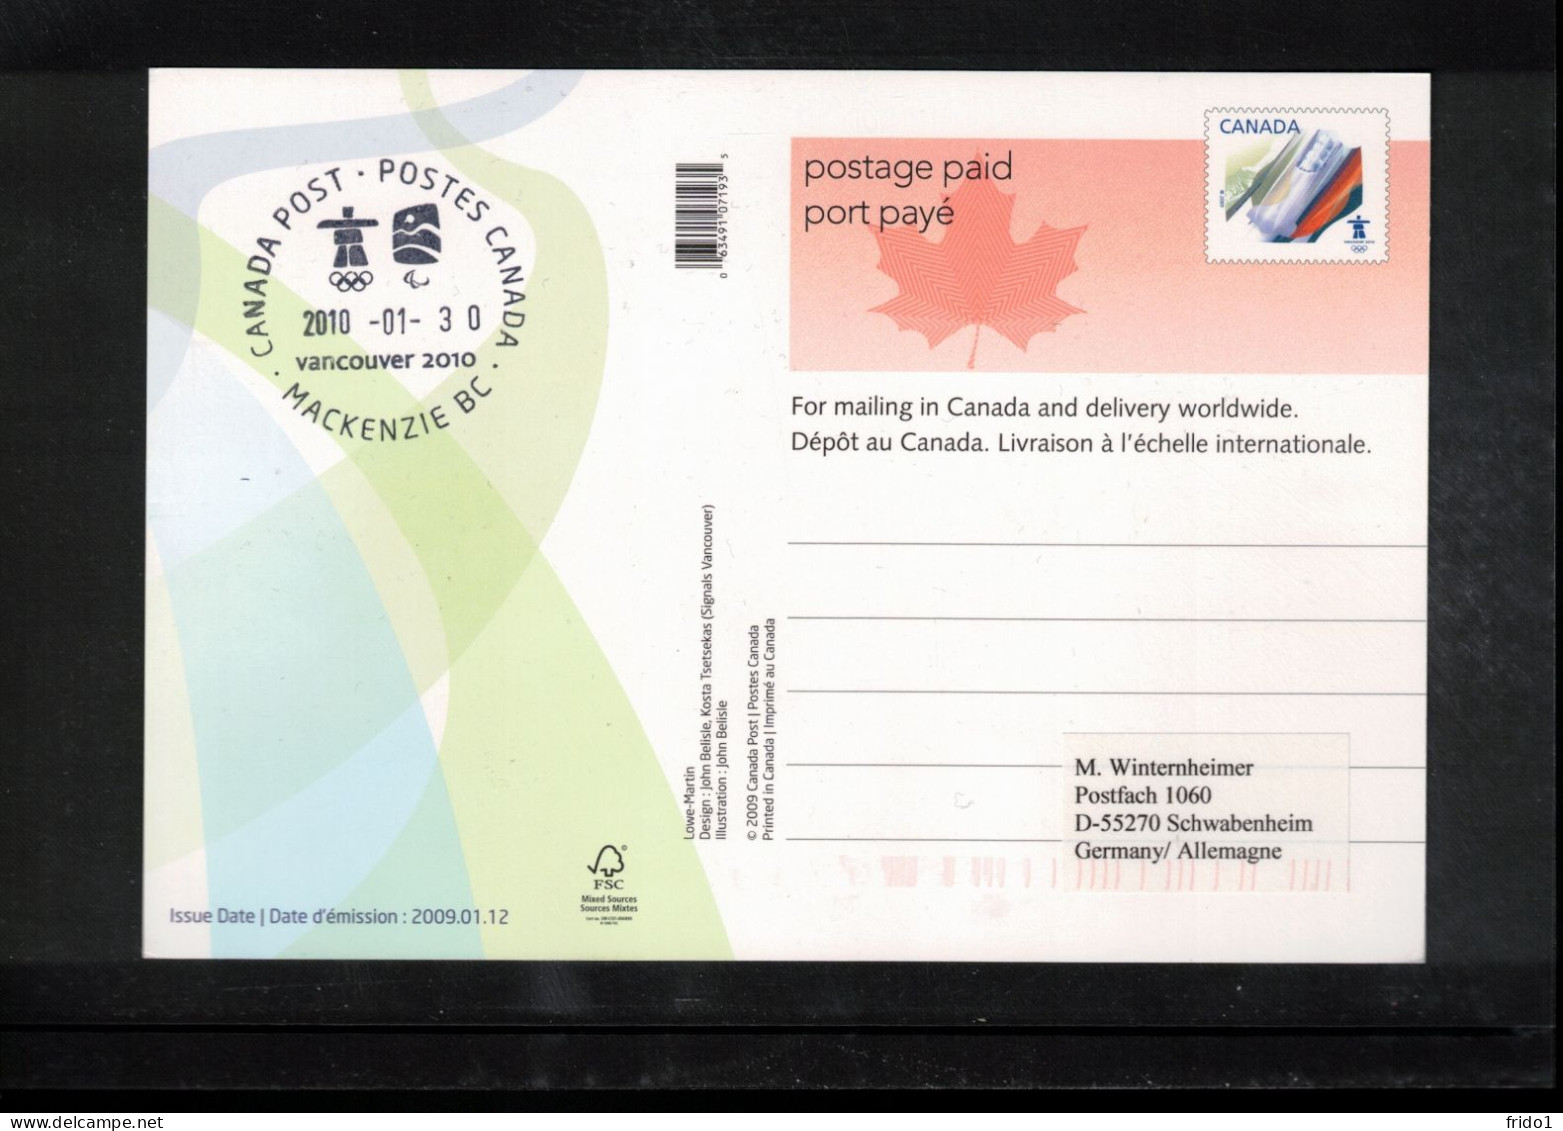 Canada 2010 Olympic Games Vancouver - MACKENZIE BC Postmark Interesting Postcard - Winter 2010: Vancouver